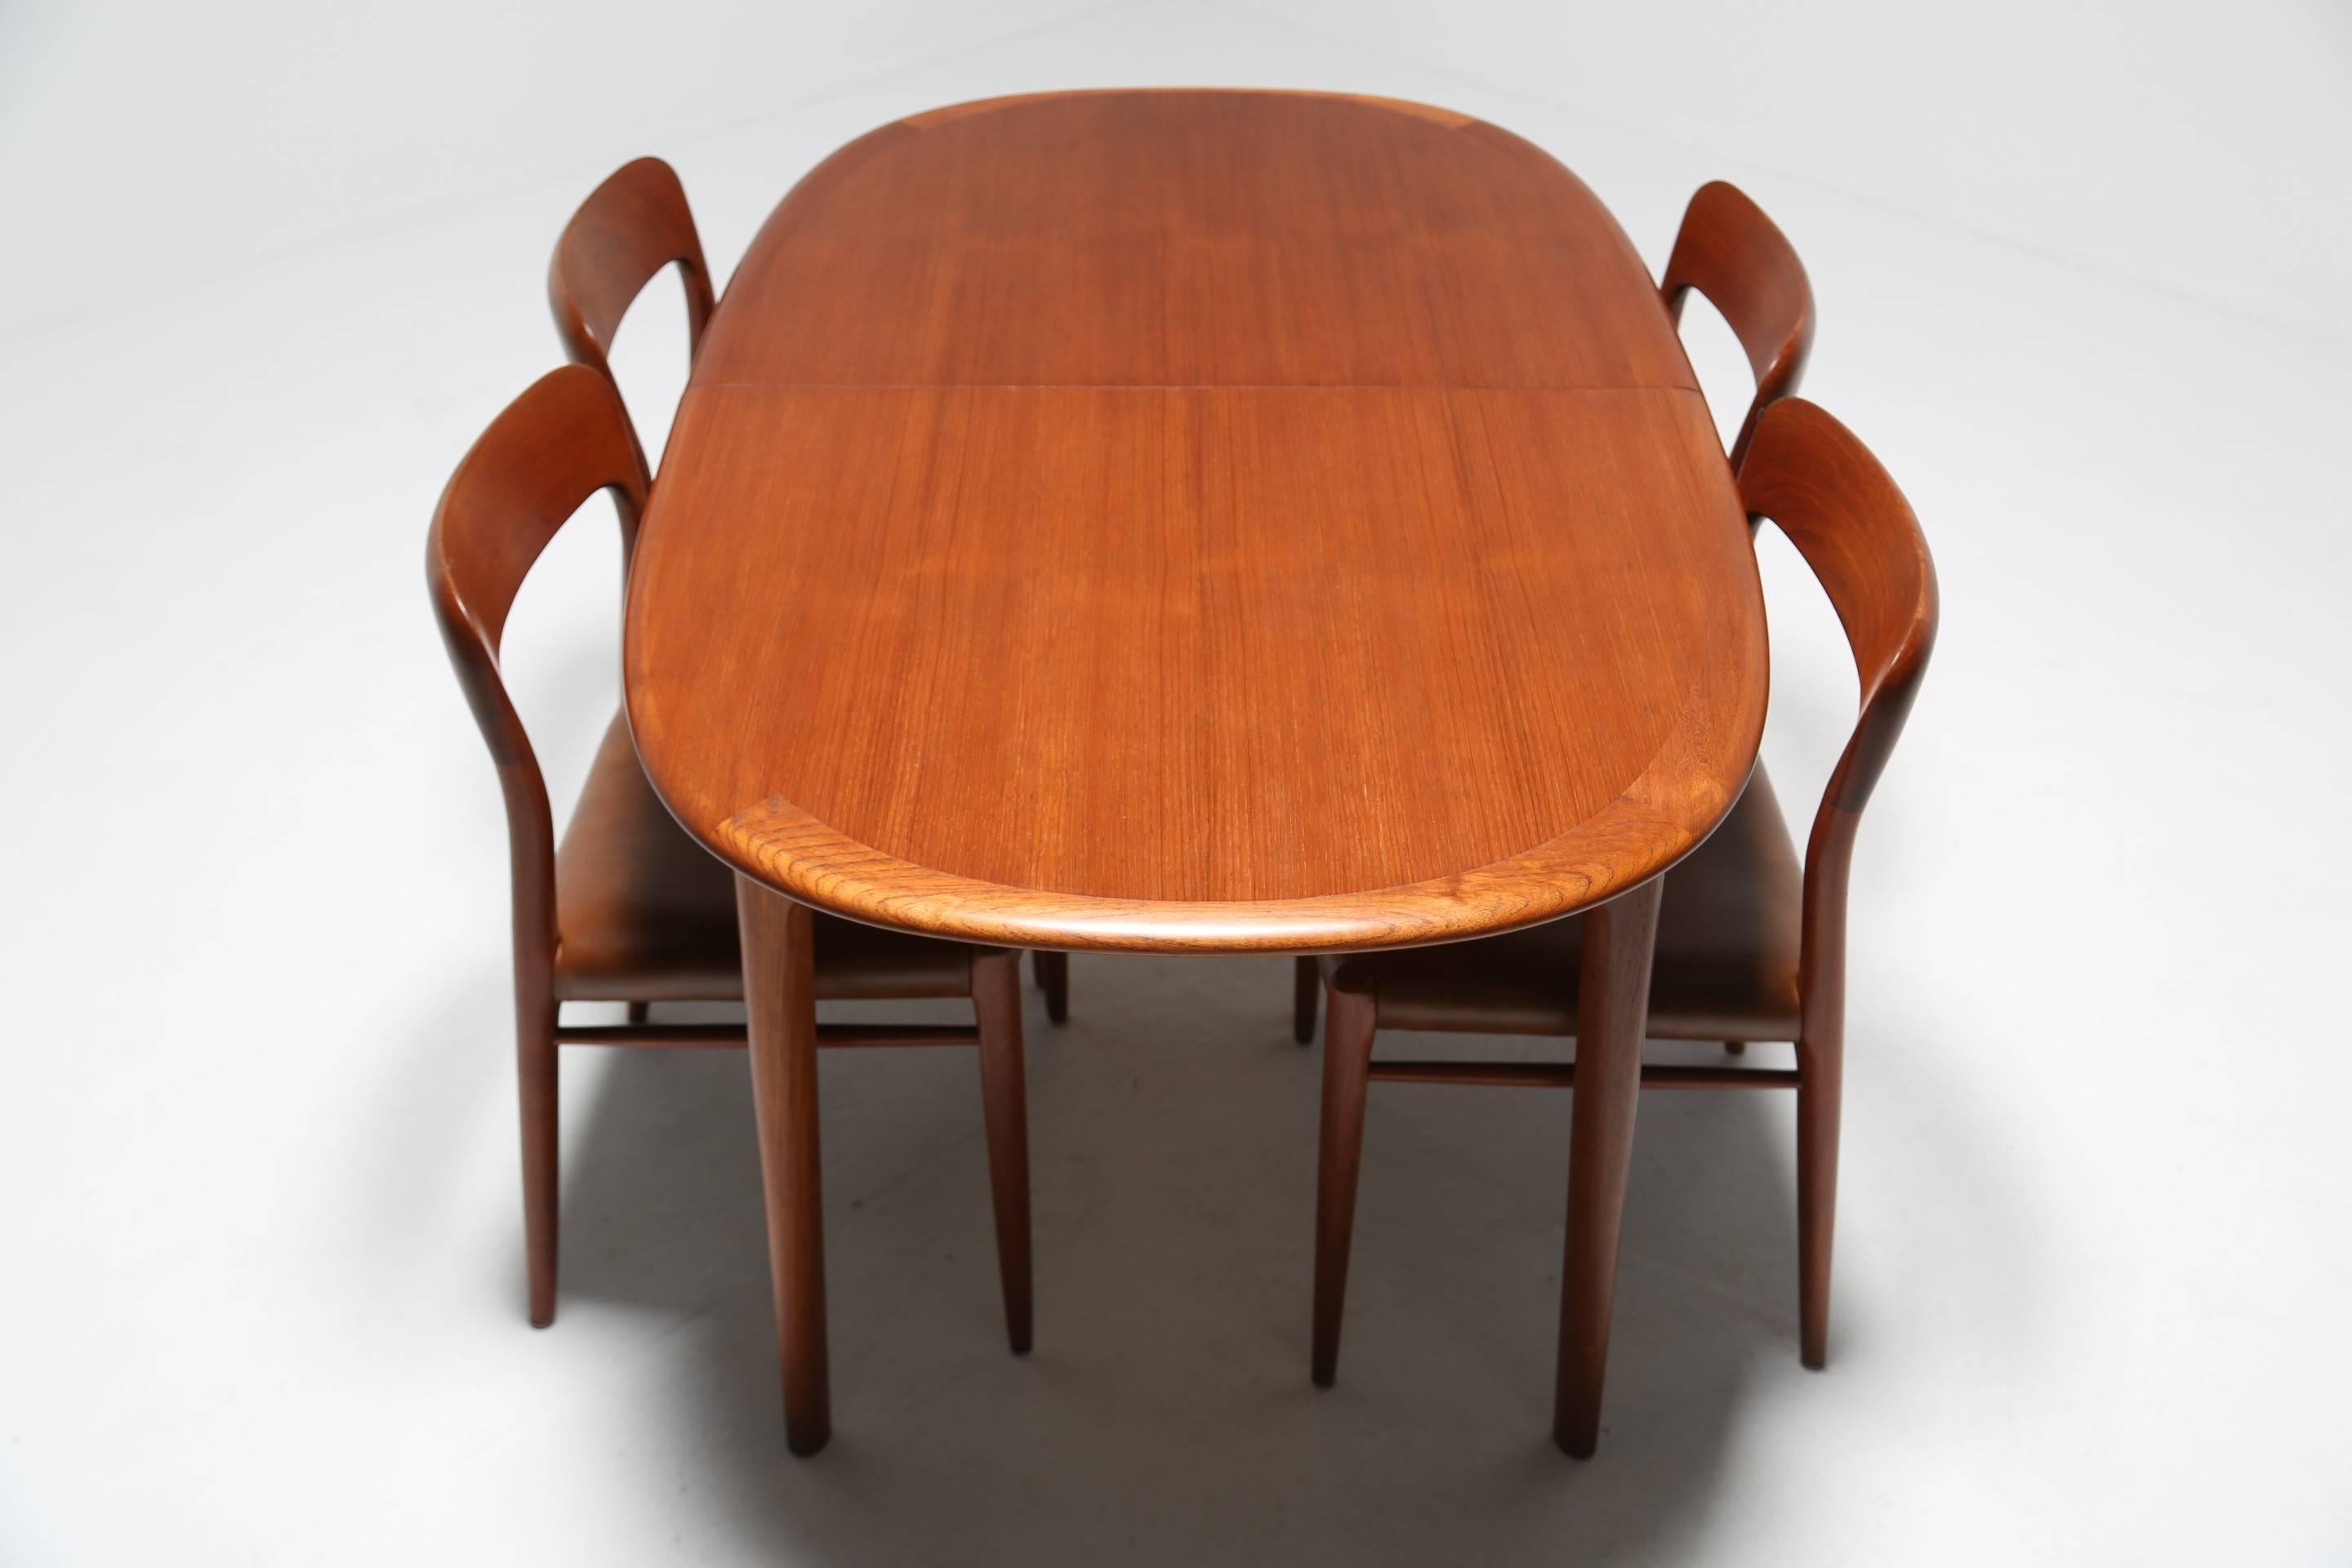 Dining set by the ever popular Danish designer Niels O. Møller is the perfect mid century offering for a home where perhaps space may be at a premium. Offered here as a dining table with four beautifully restored chairs, it has to be stated that 6